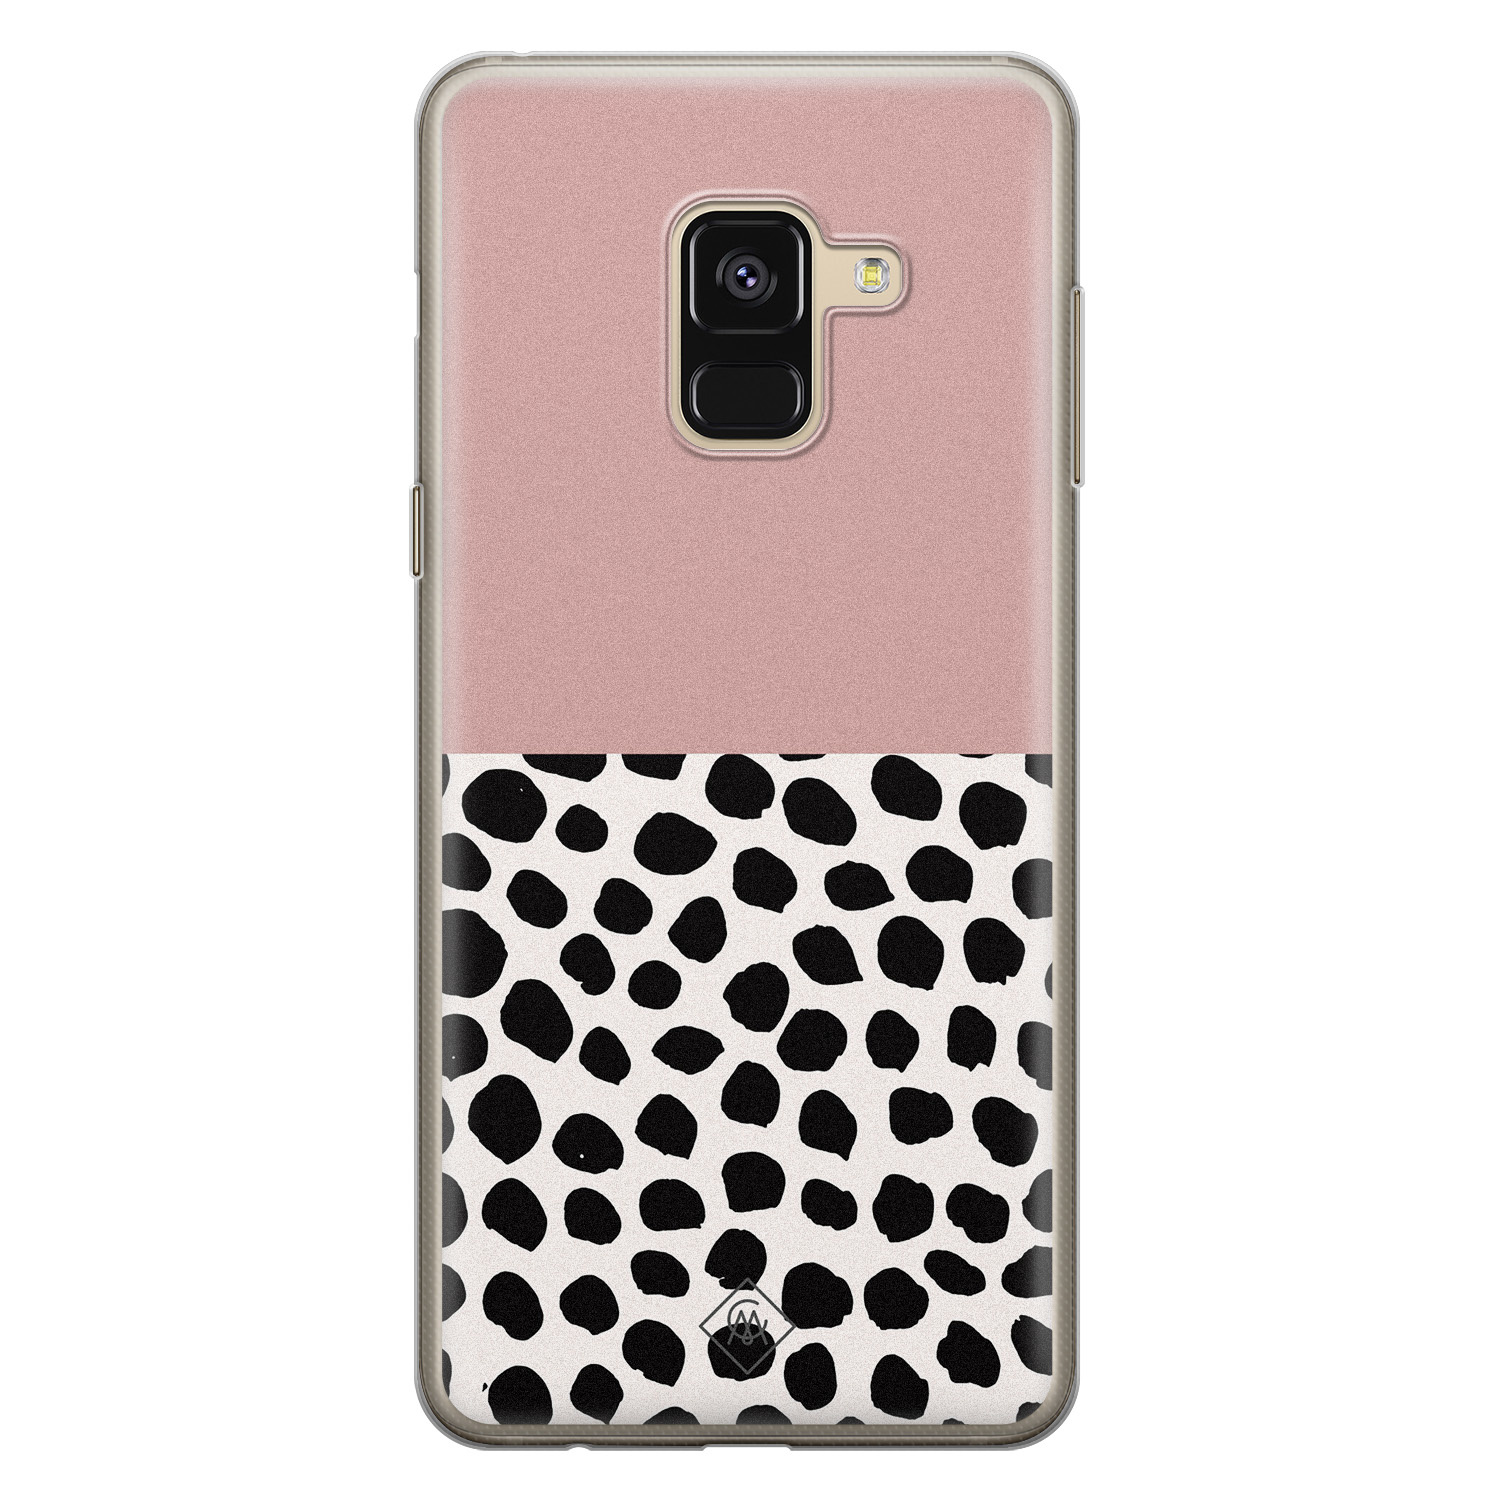 Samsung Galaxy A8 (2018) siliconen hoesje - Pink dots